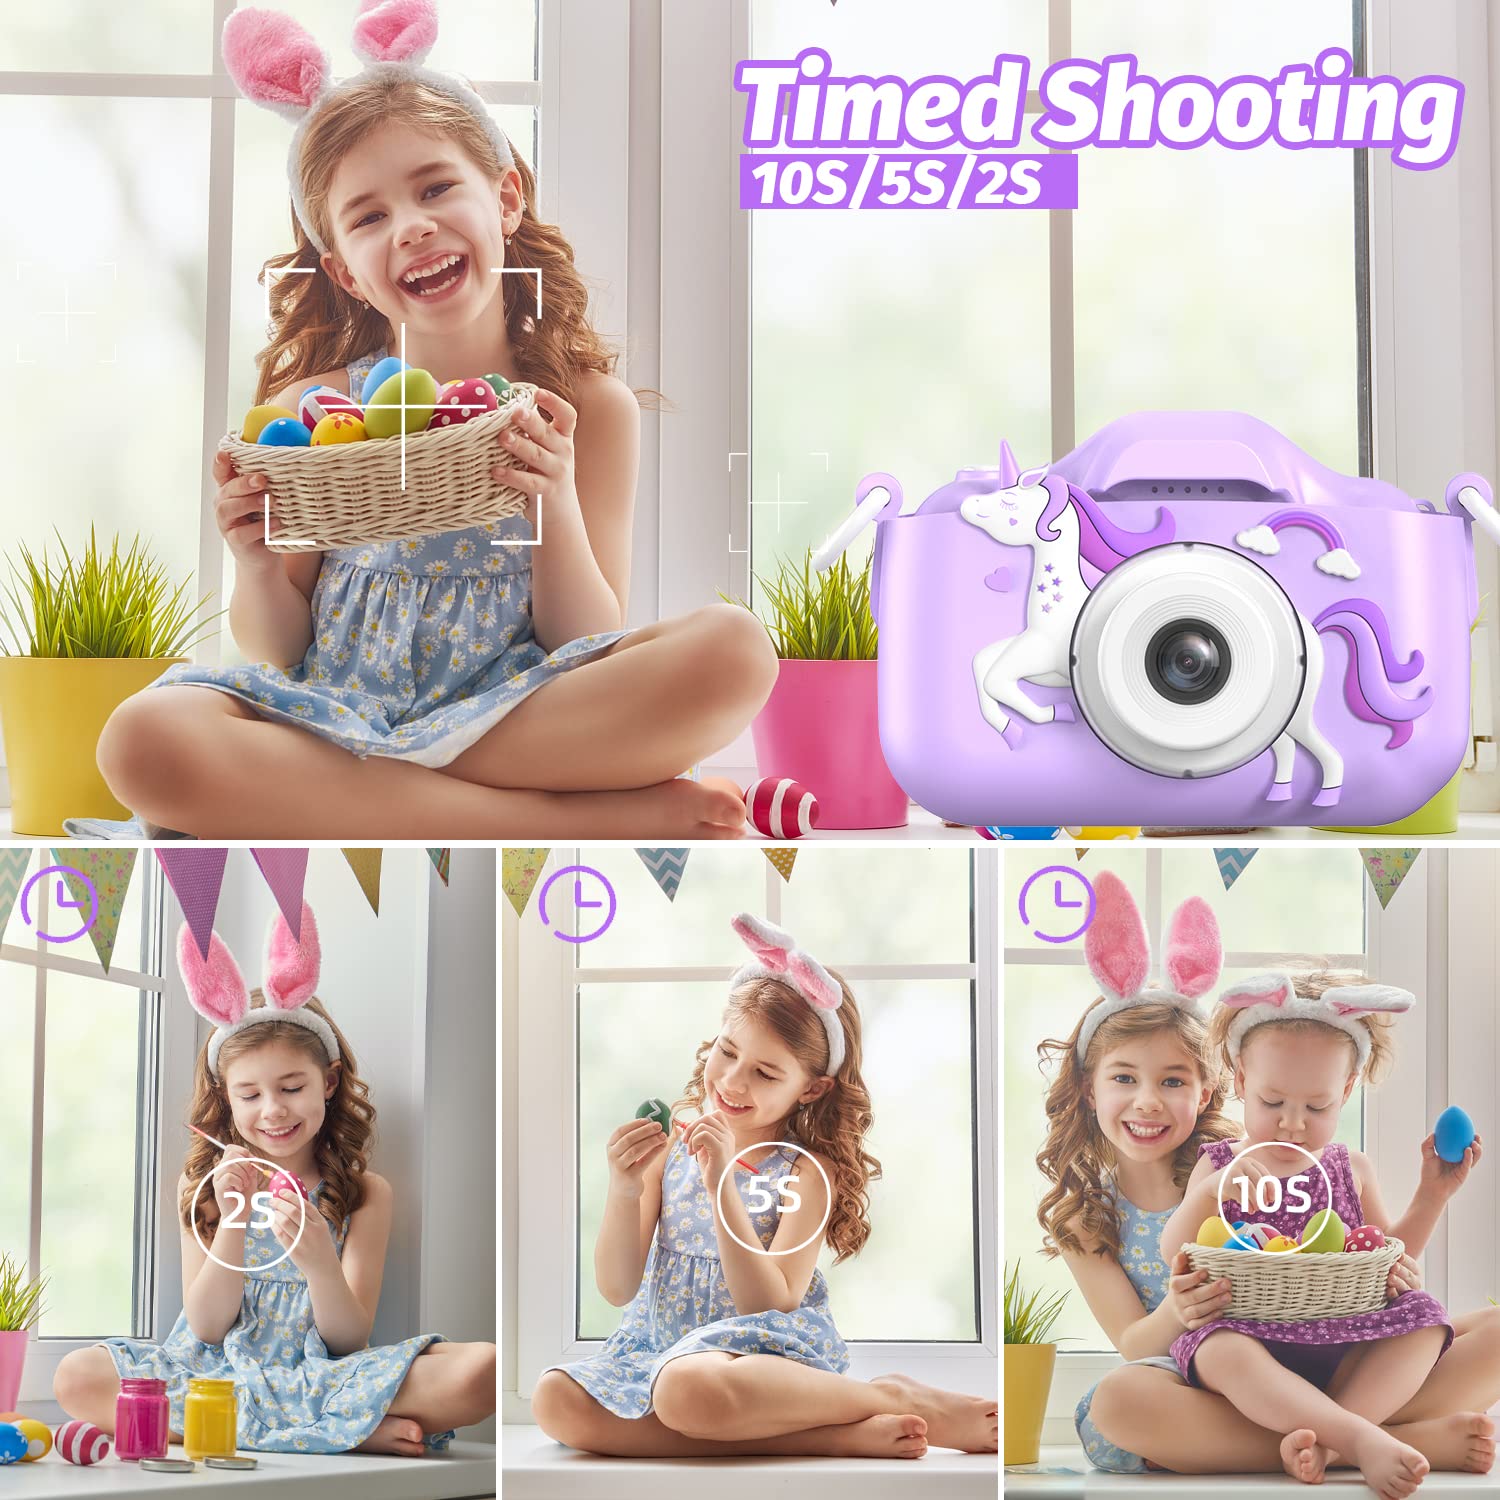 Mgaolo Children's Camera Toys for 3-12 Years Old Kids Boys Girls,HD Digital Video Camera with Protective Silicone Cover,Christmas Birthday Gifts with 32GB SD Card (Unicorn Purple)